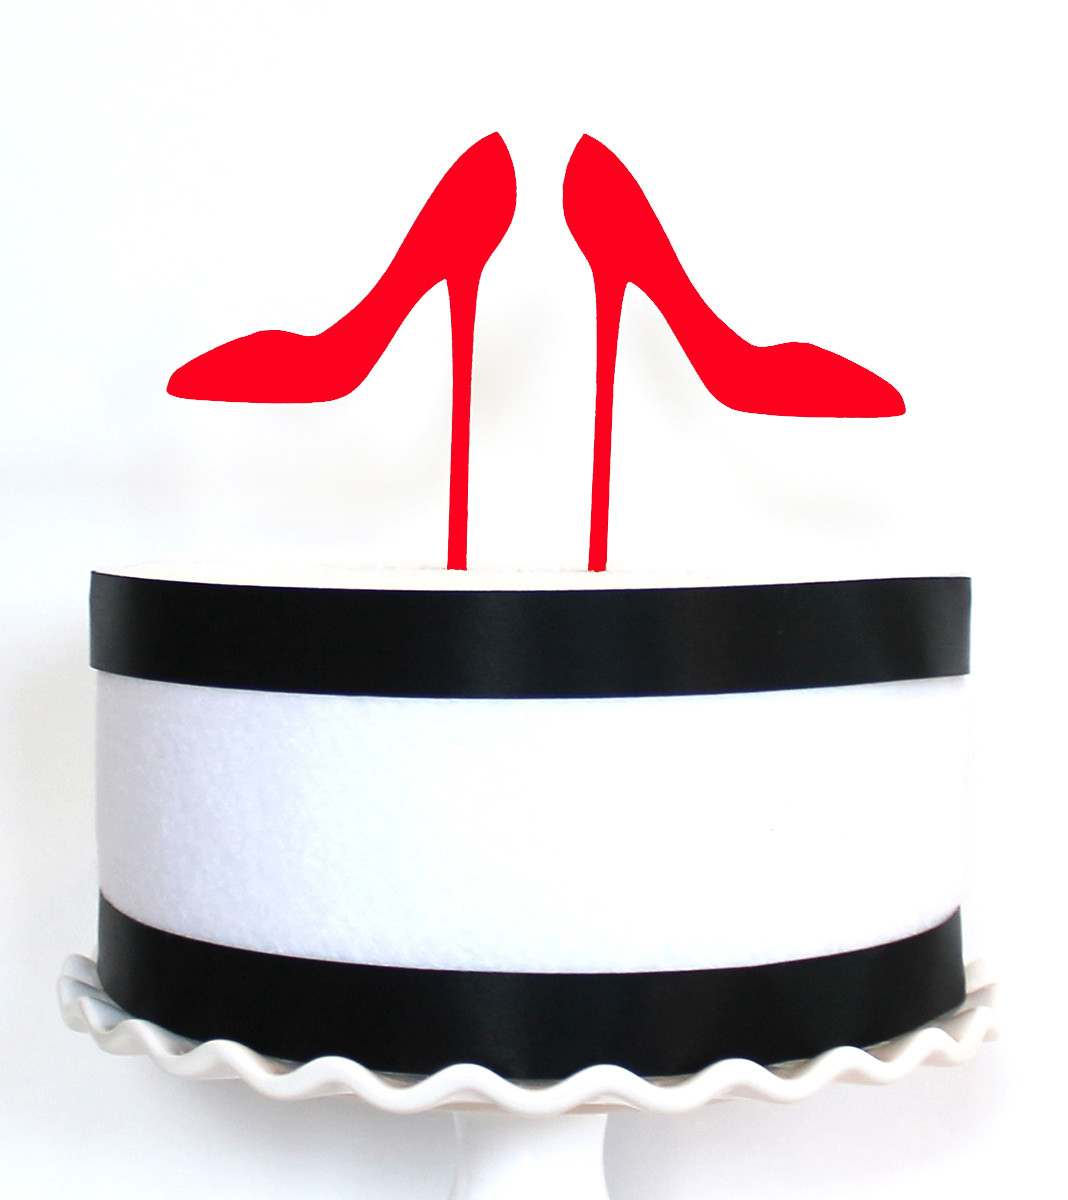 Heels and cake Stock Photos, Royalty Free Heels and cake Images |  Depositphotos